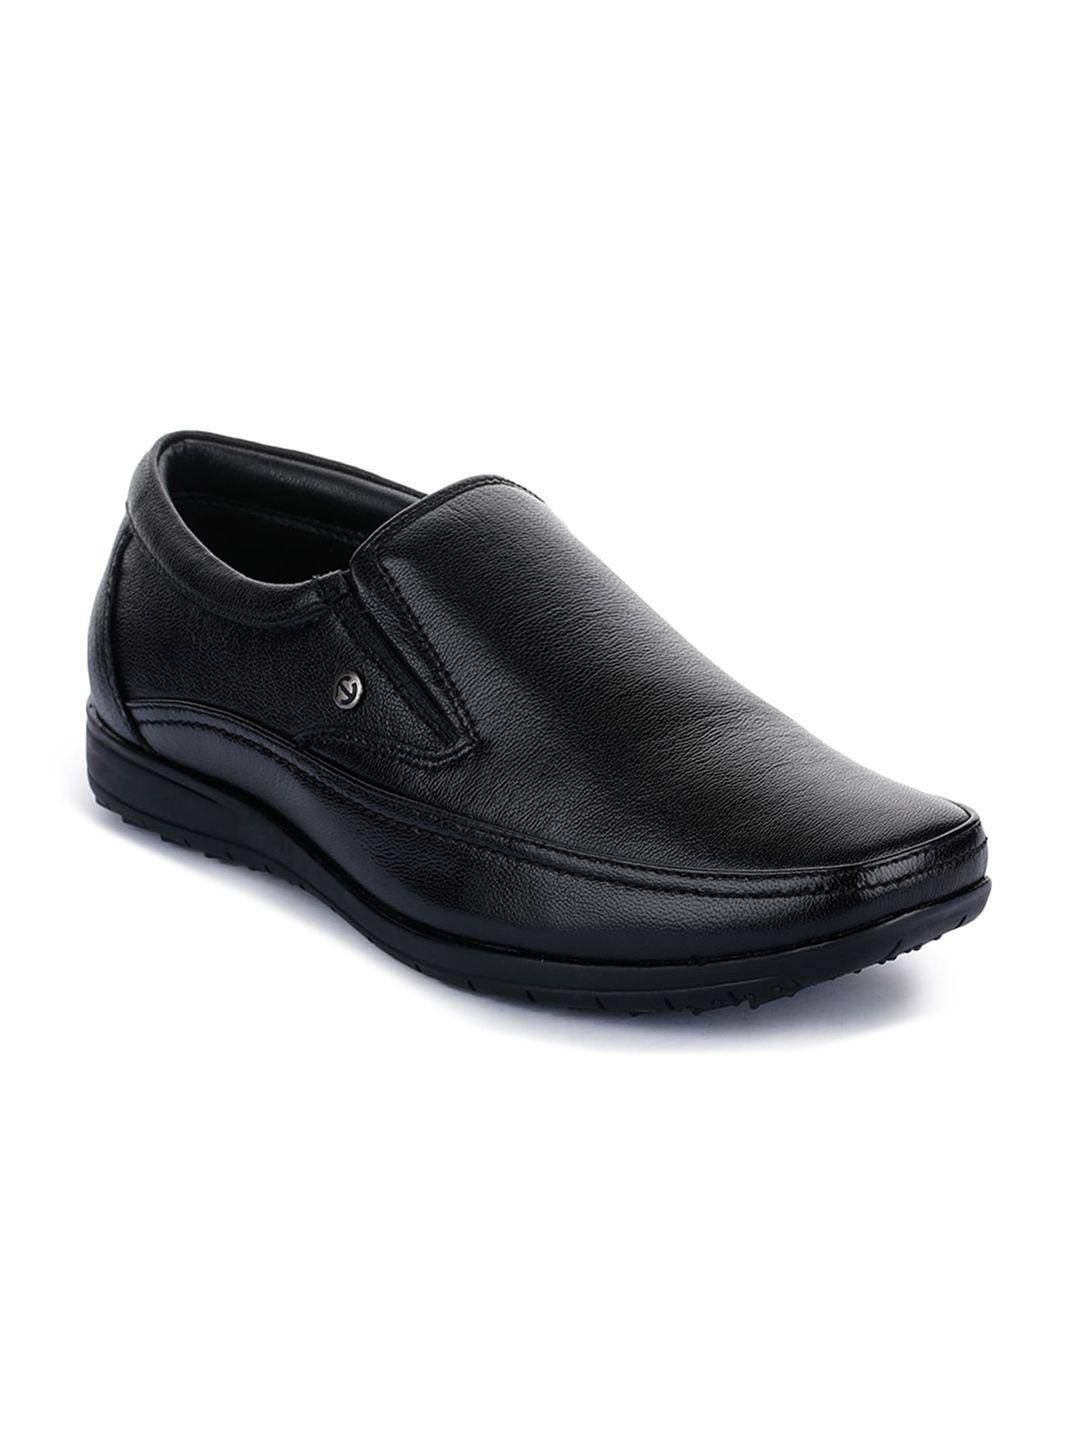 liberty-men-textured-leather-formal-slip-on-shoes